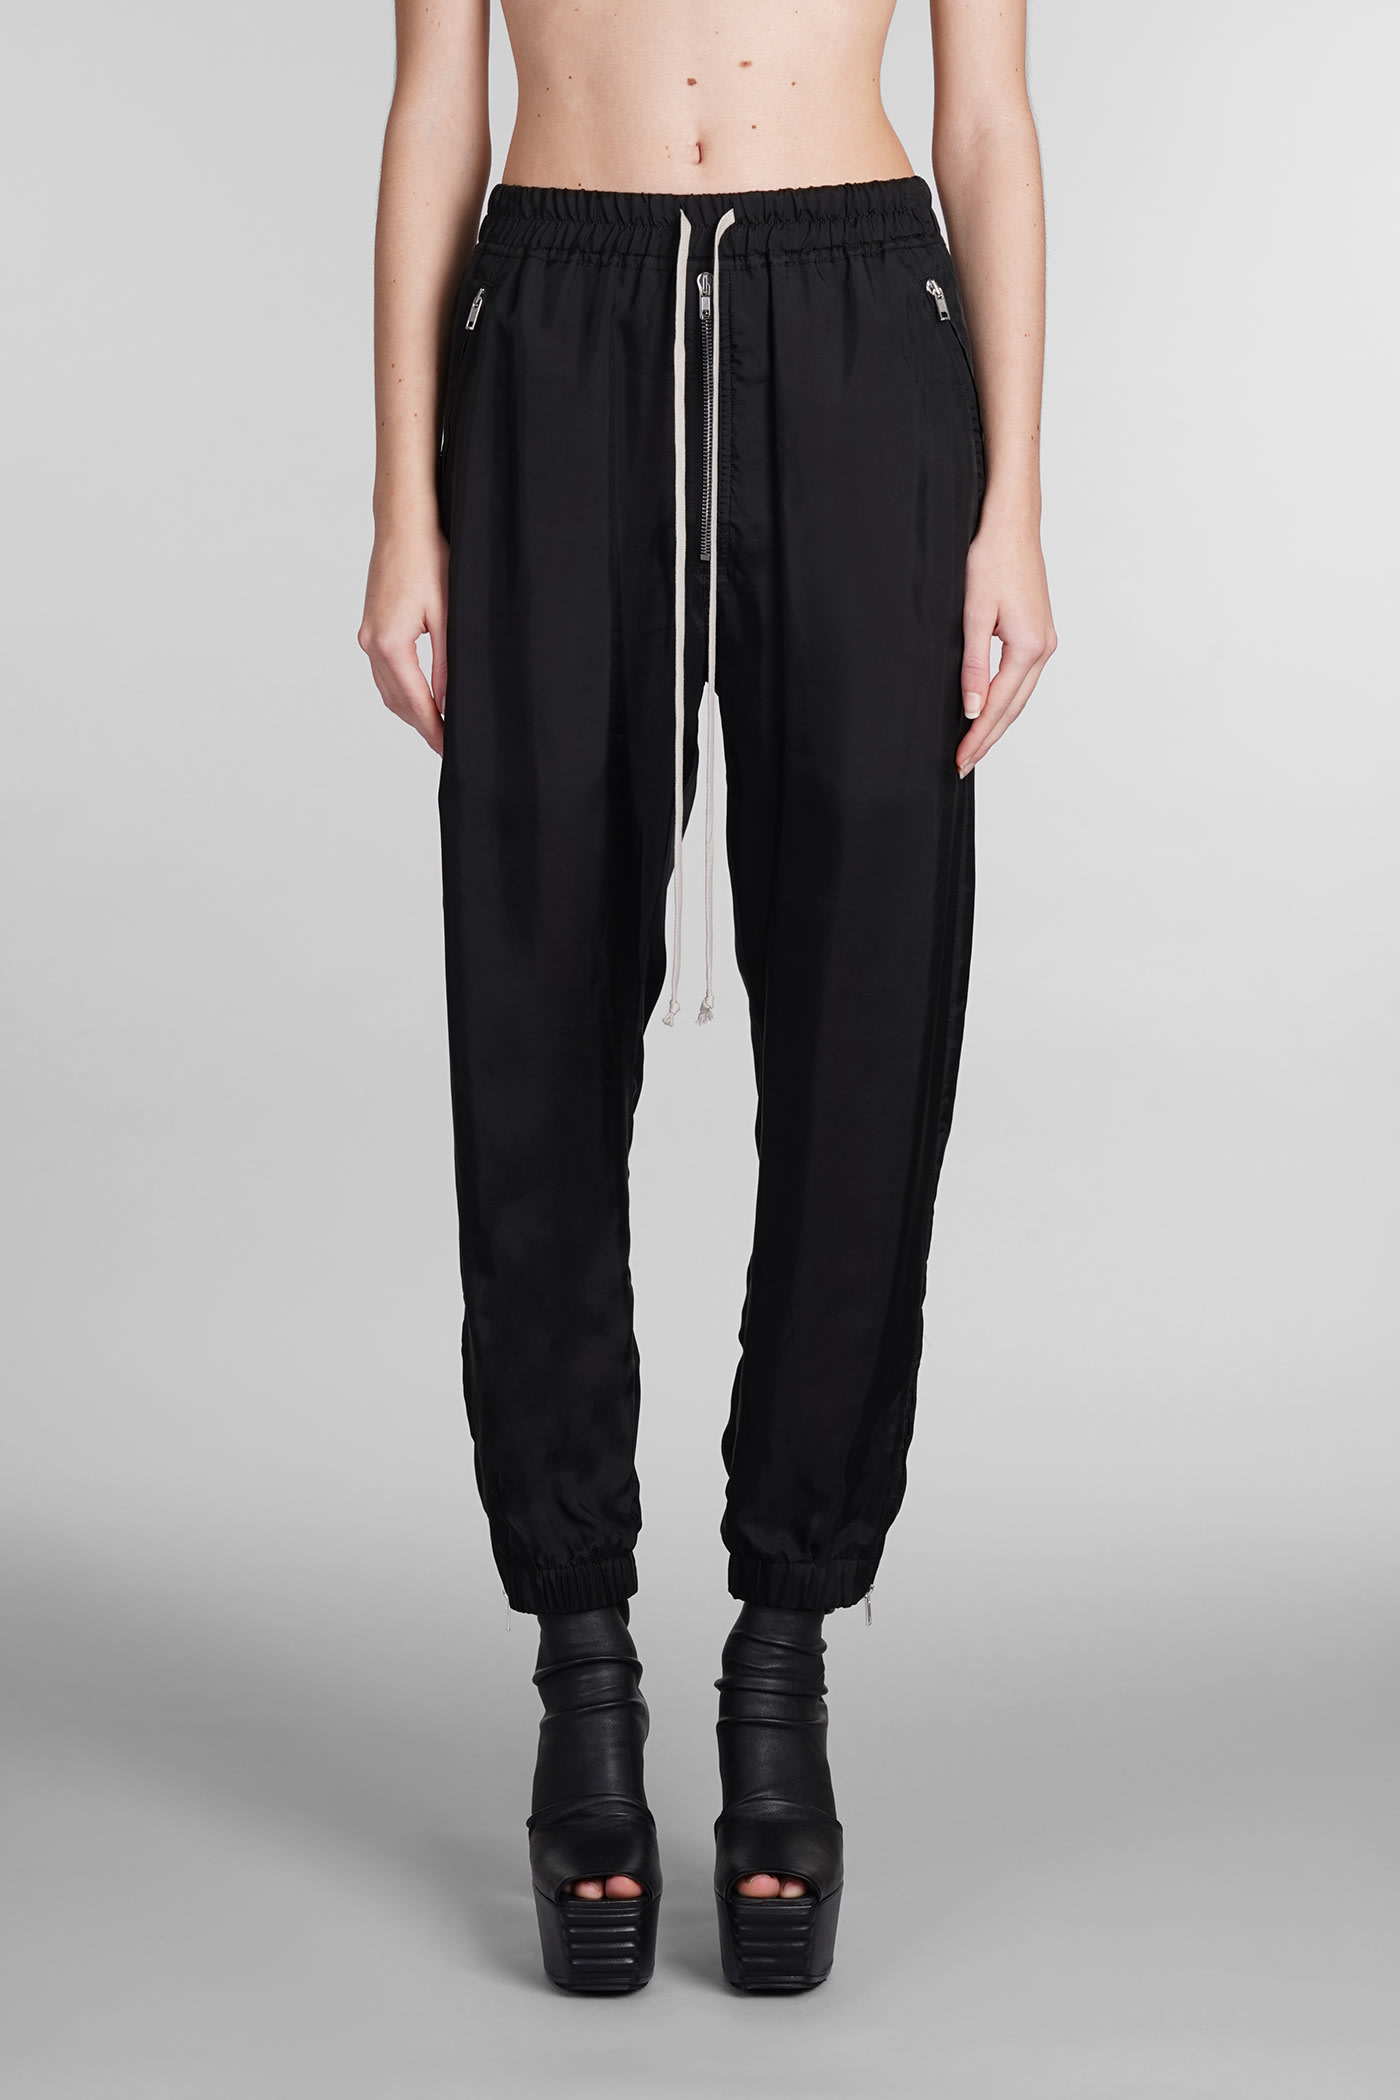 RICK OWENS TRACK PANTS IN BLACK POLYAMIDE POLYESTER